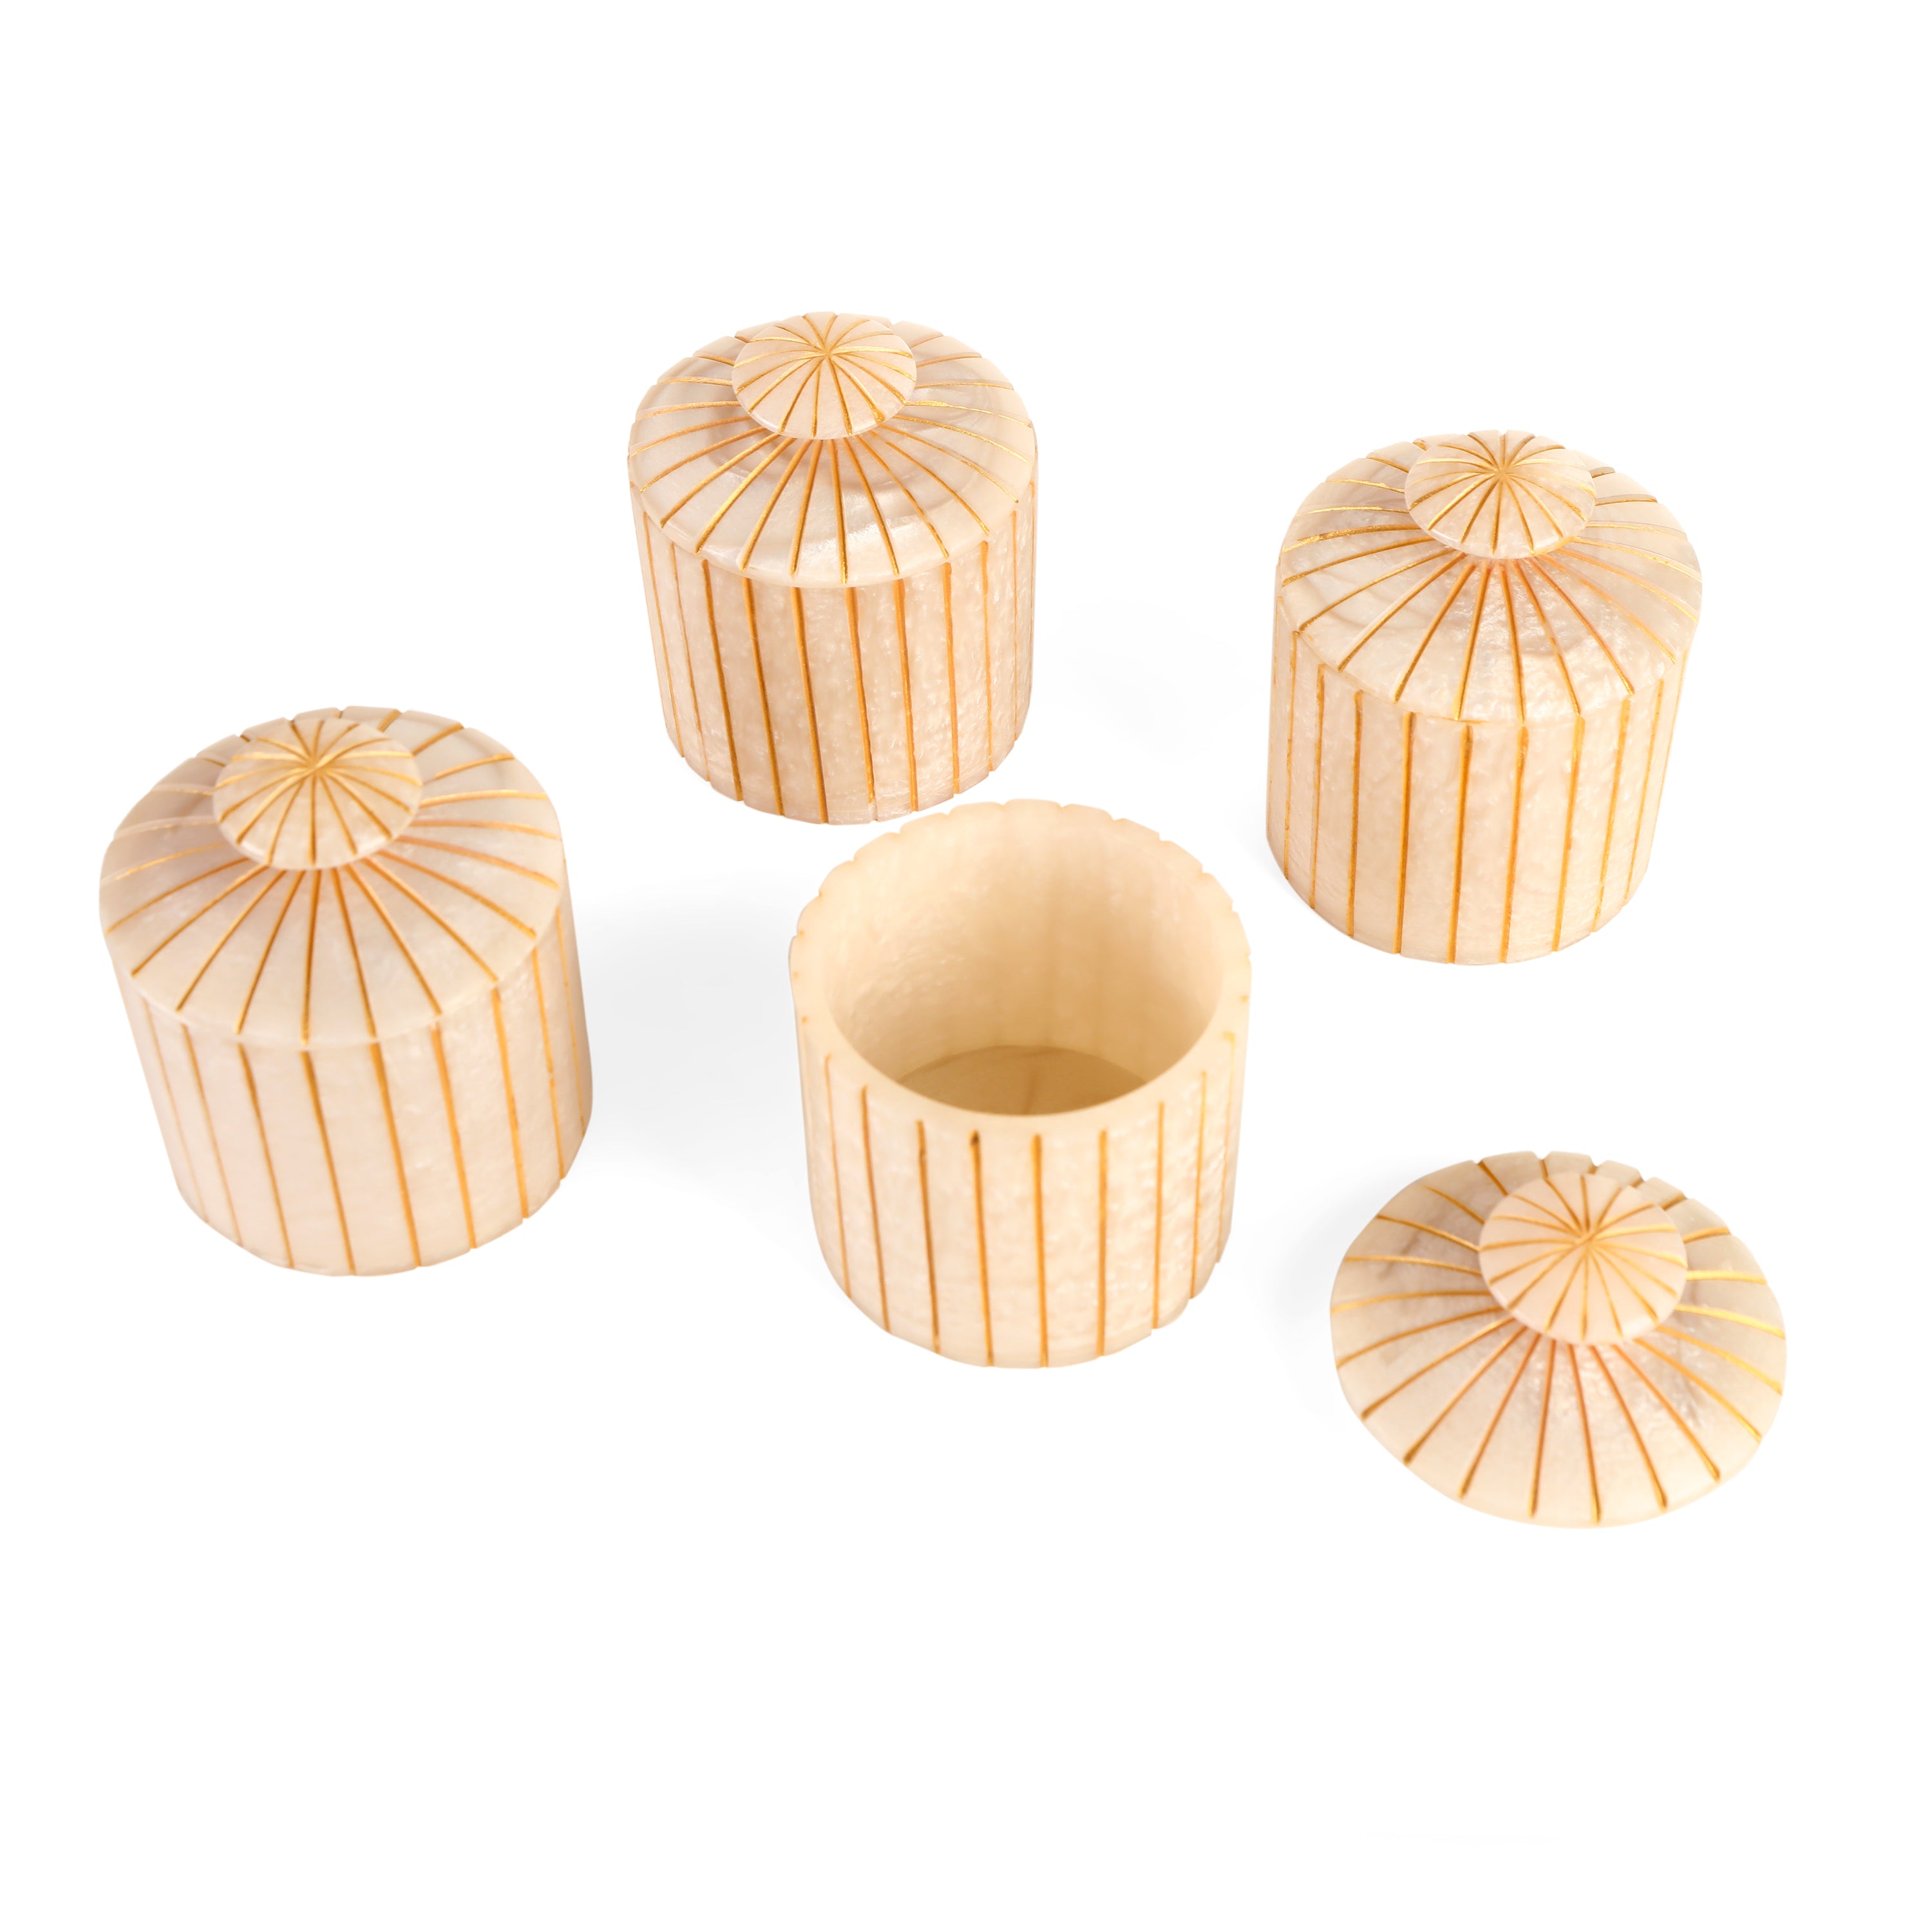 Resin Jar Set With Tray - Set of 4 (Ivory) 3- The Home Co.